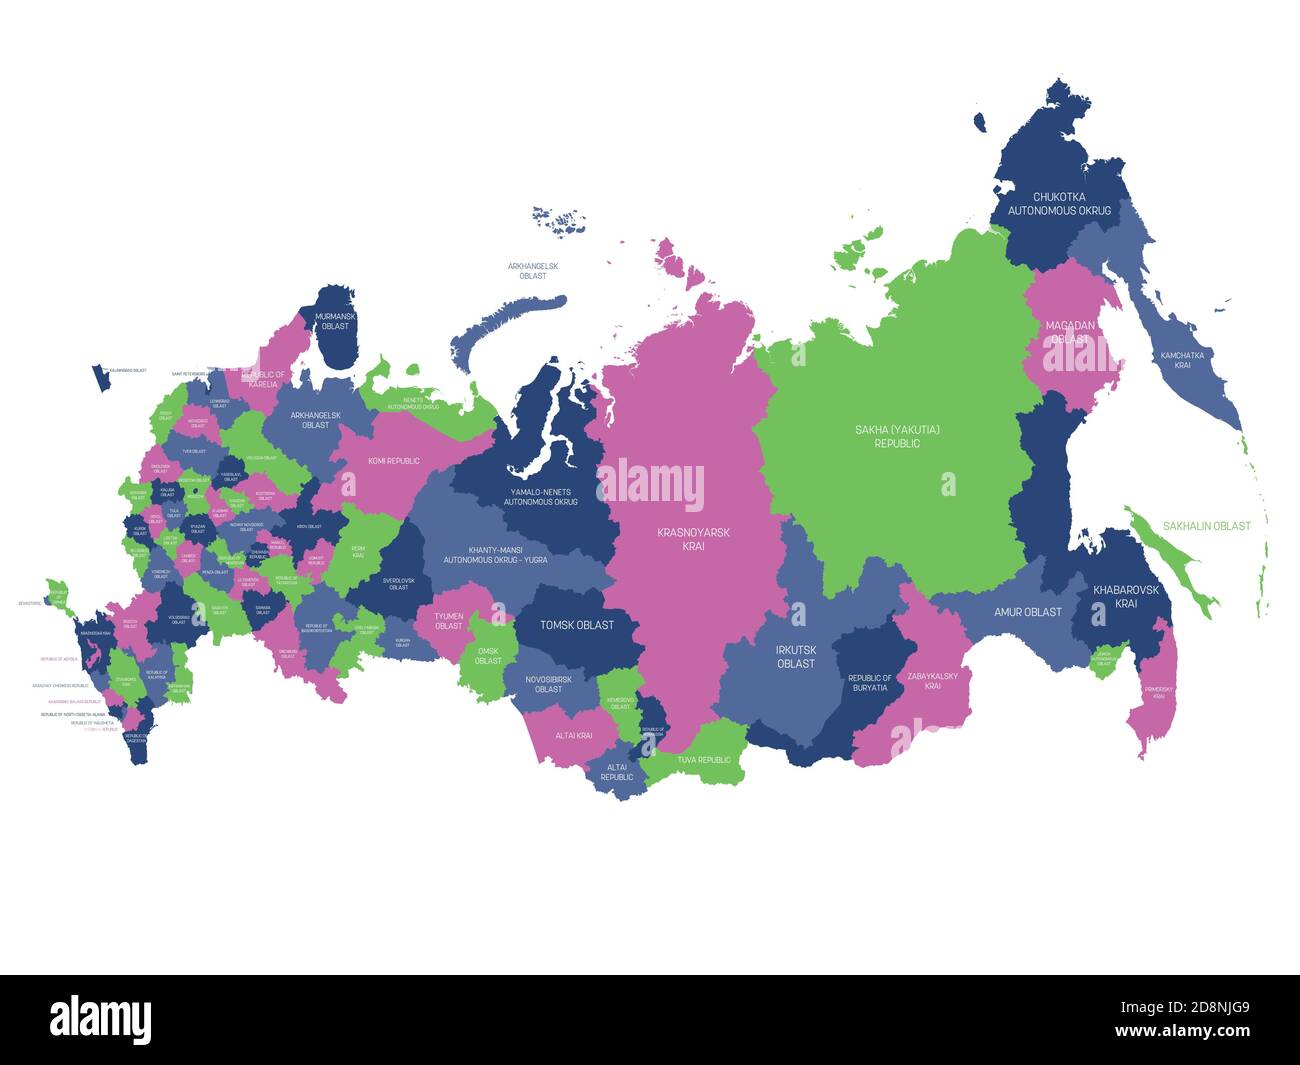 Political map of Russia, or Russian Federation. Federal subjects - republics, krays, oblasts, cities of federal significance, autonomous oblasts and autonomous okrugs. Simple flat vector map with labels. Stock Vector